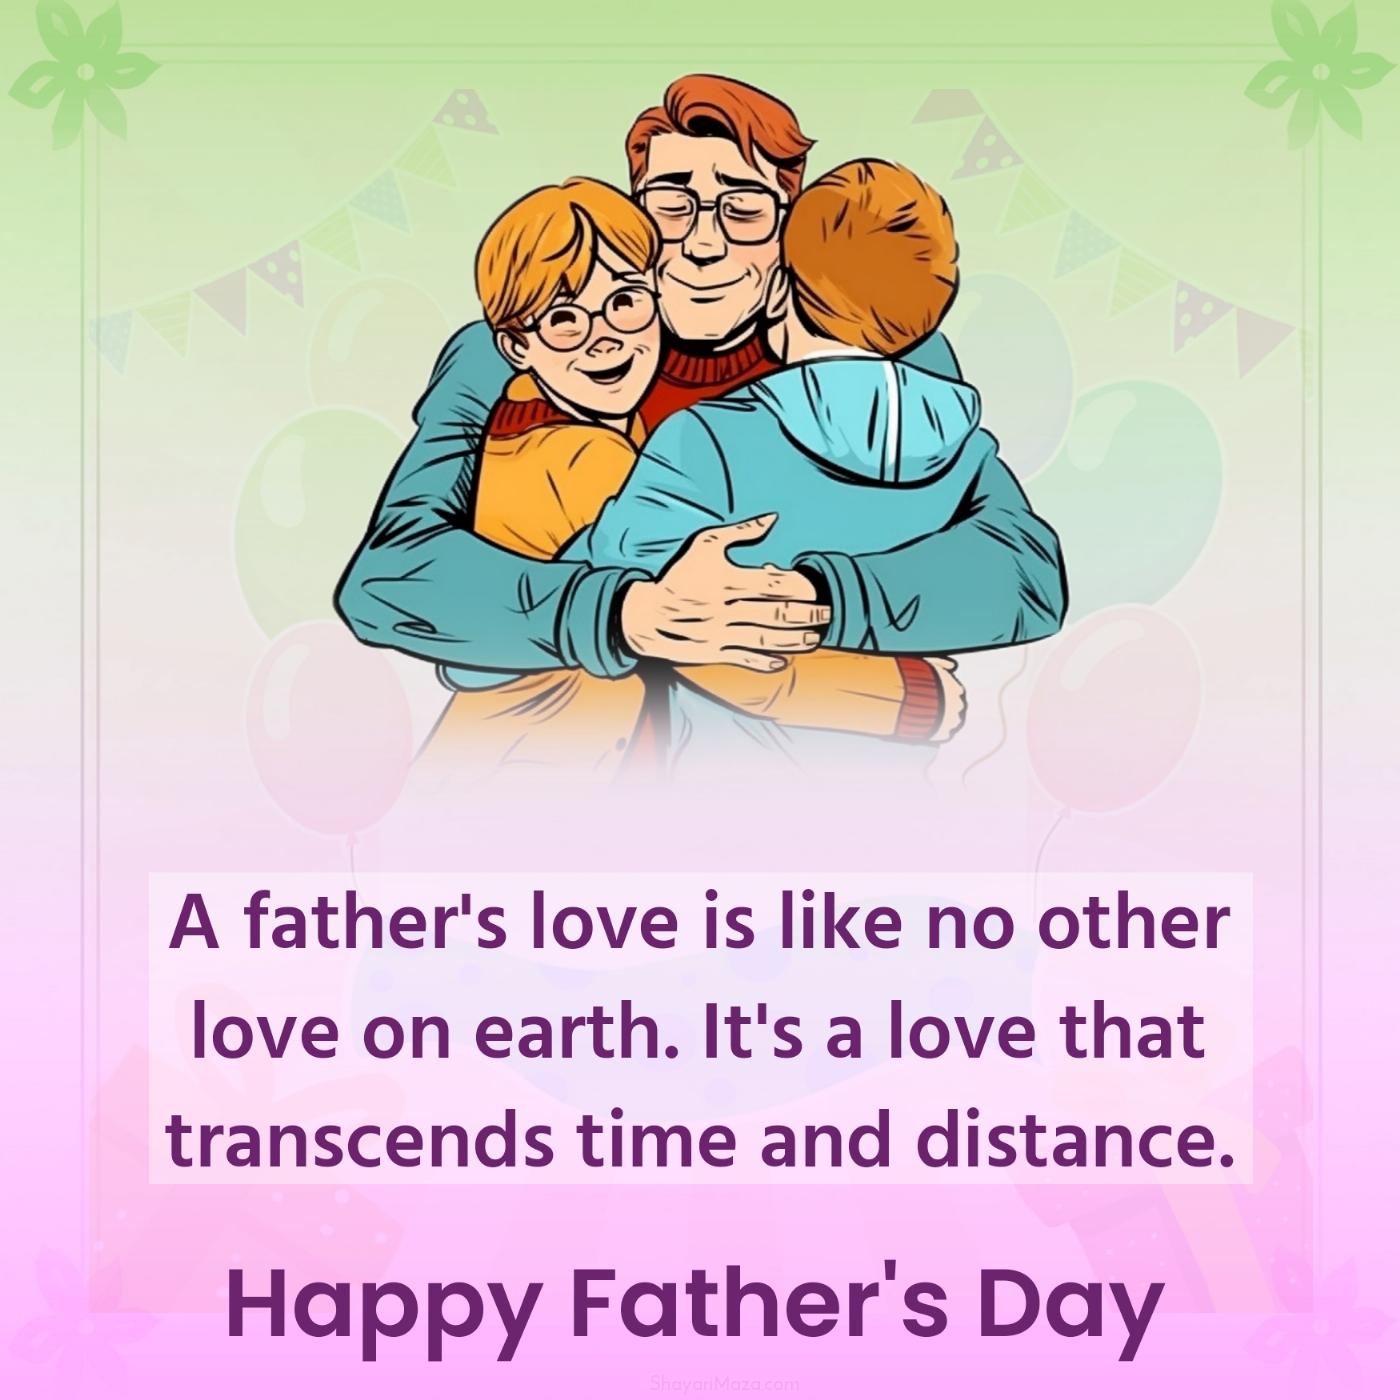 A father's love is like no other love on earth